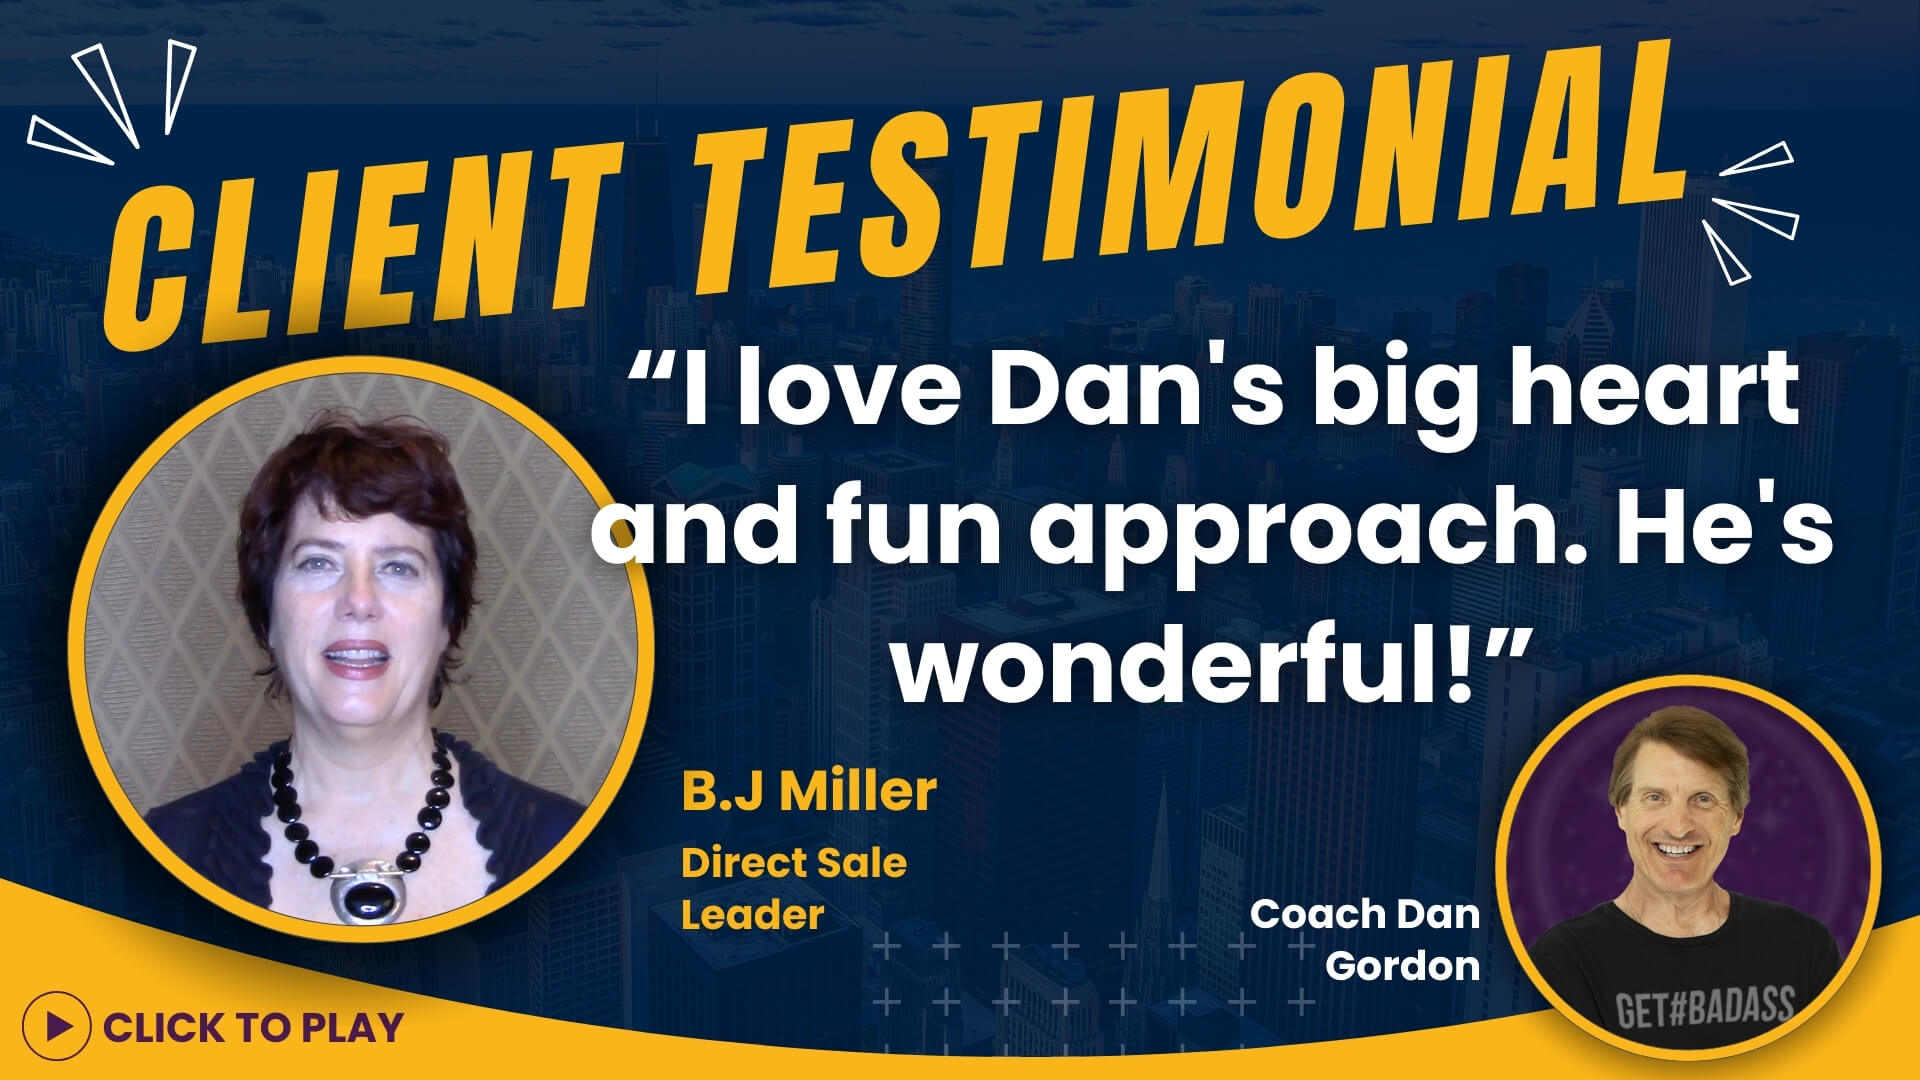 B.J. Miller, Direct Sale Leader, endorses Coach Dan Gordon, praising his heartfelt and enjoyable approach in her client testimonial video with a 'Click to Play' button.